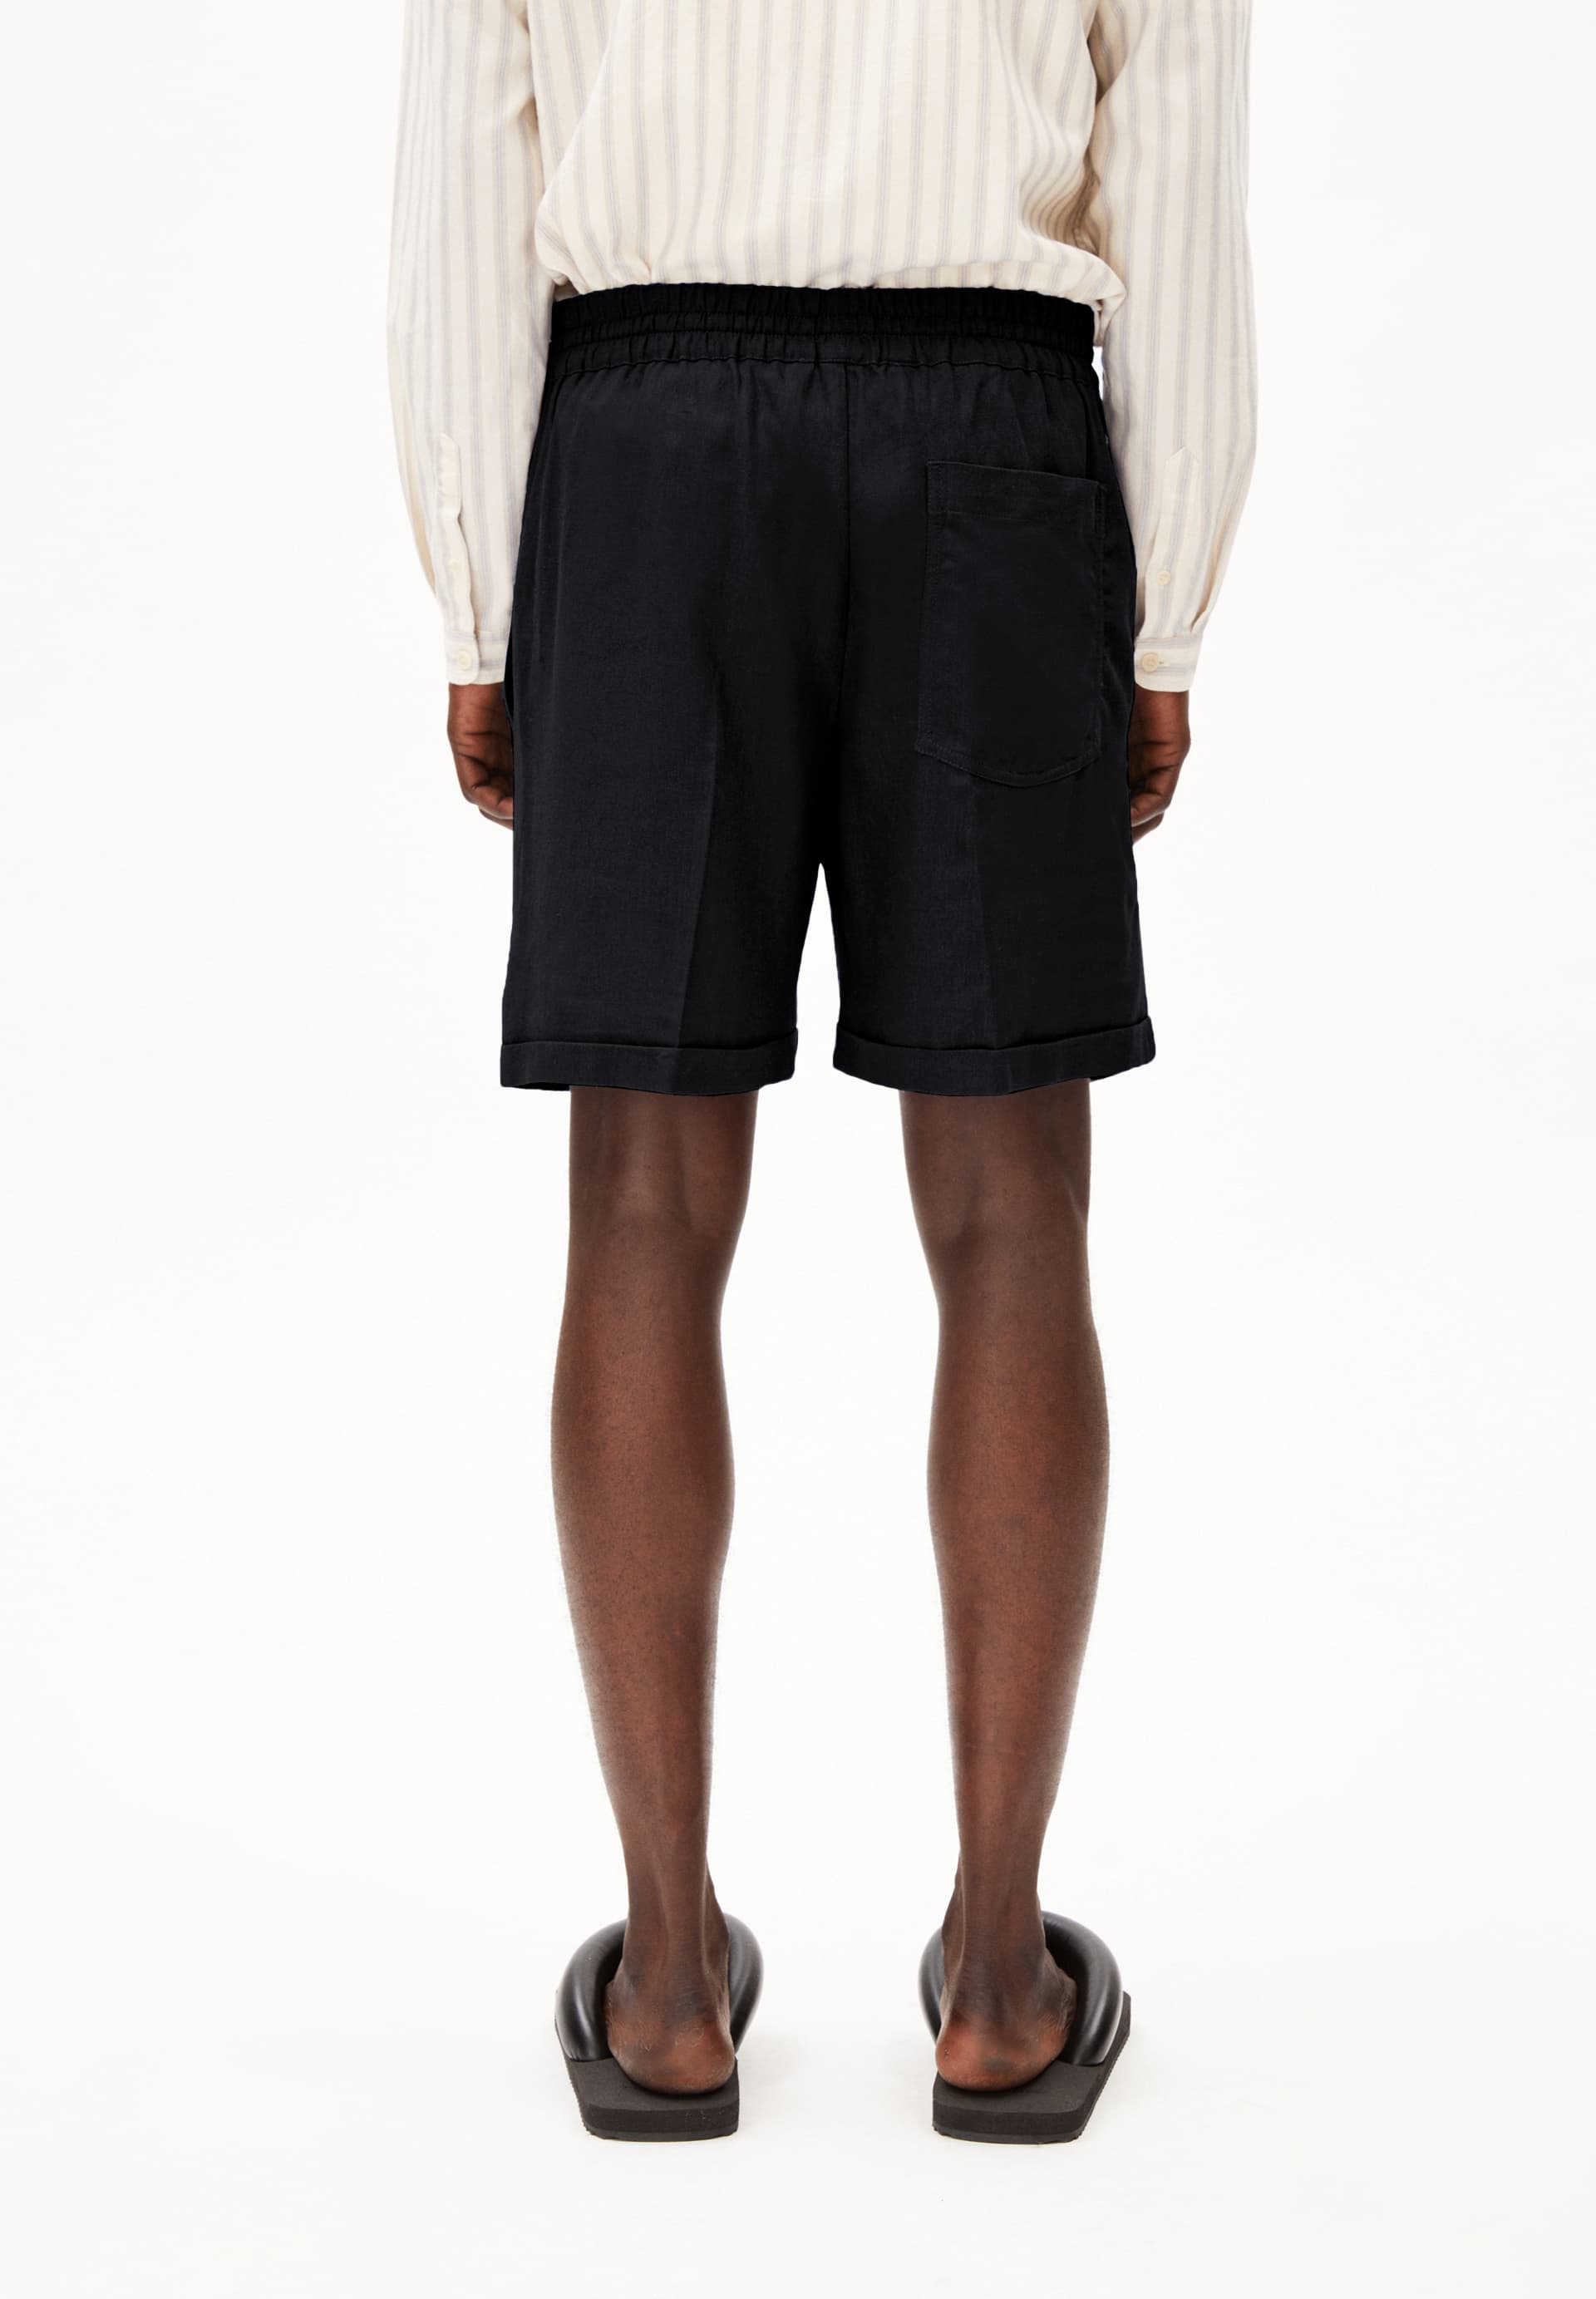 JAACQUE Shorts made of Linen-Mix